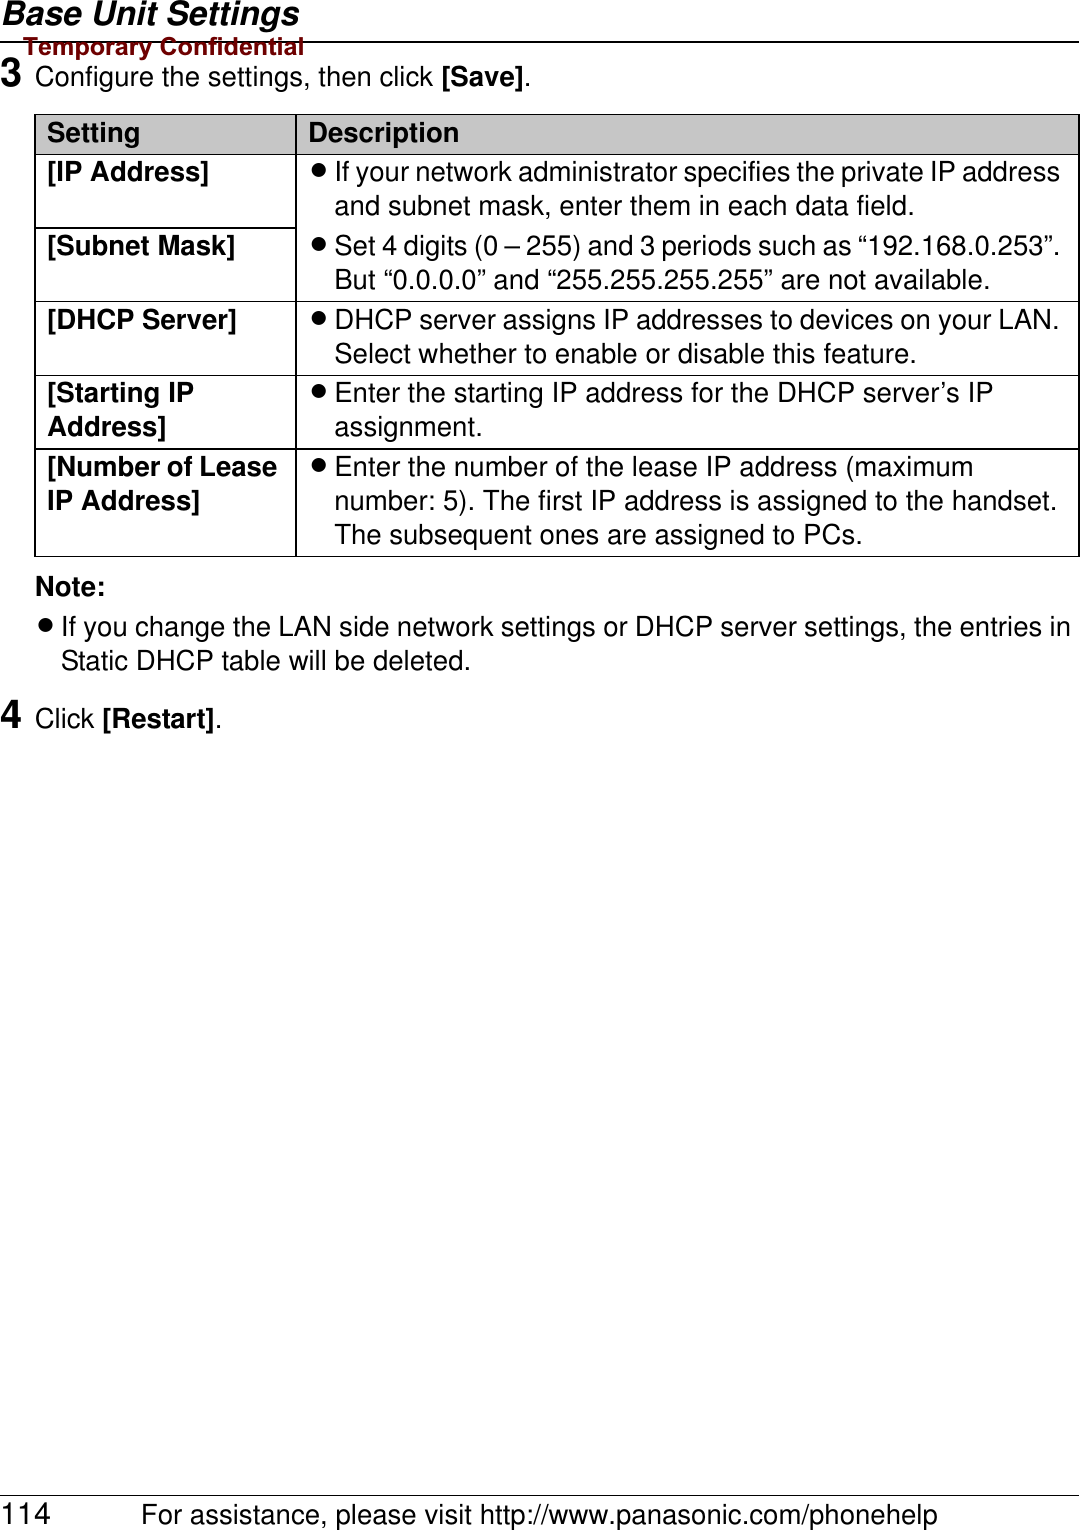 Base Unit Settings114 For assistance, please visit http://www.panasonic.com/phonehelp3Configure the settings, then click [Save].Note:LIf you change the LAN side network settings or DHCP server settings, the entries in Static DHCP table will be deleted.4Click [Restart].Setting Description[IP Address] LIf your network administrator specifies the private IP address and subnet mask, enter them in each data field.LSet 4 digits (0 – 255) and 3 periods such as “192.168.0.253”. But “0.0.0.0” and “255.255.255.255” are not available.[Subnet Mask][DHCP Server] LDHCP server assigns IP addresses to devices on your LAN. Select whether to enable or disable this feature.[Starting IP Address]LEnter the starting IP address for the DHCP server’s IP assignment.[Number of Lease IP Address]LEnter the number of the lease IP address (maximum number: 5). The first IP address is assigned to the handset. The subsequent ones are assigned to PCs.Temporary Confidential